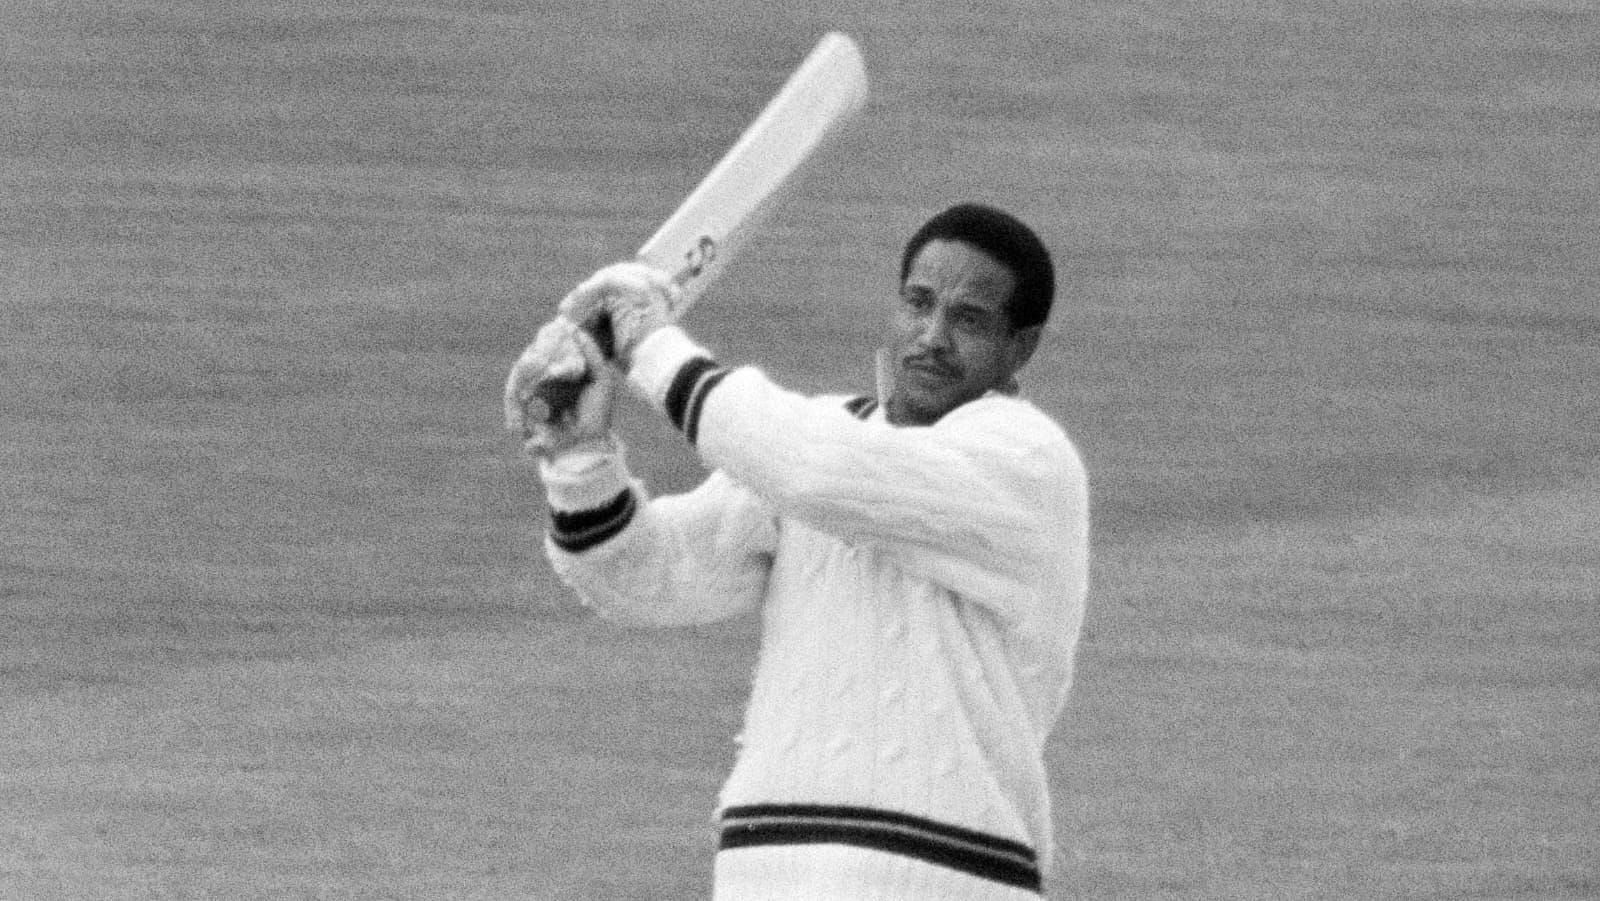 Sir Garfield Sobers became the first cricketer to slam six 6s in an over in first-class cricket. [Pic Credit - ICC]